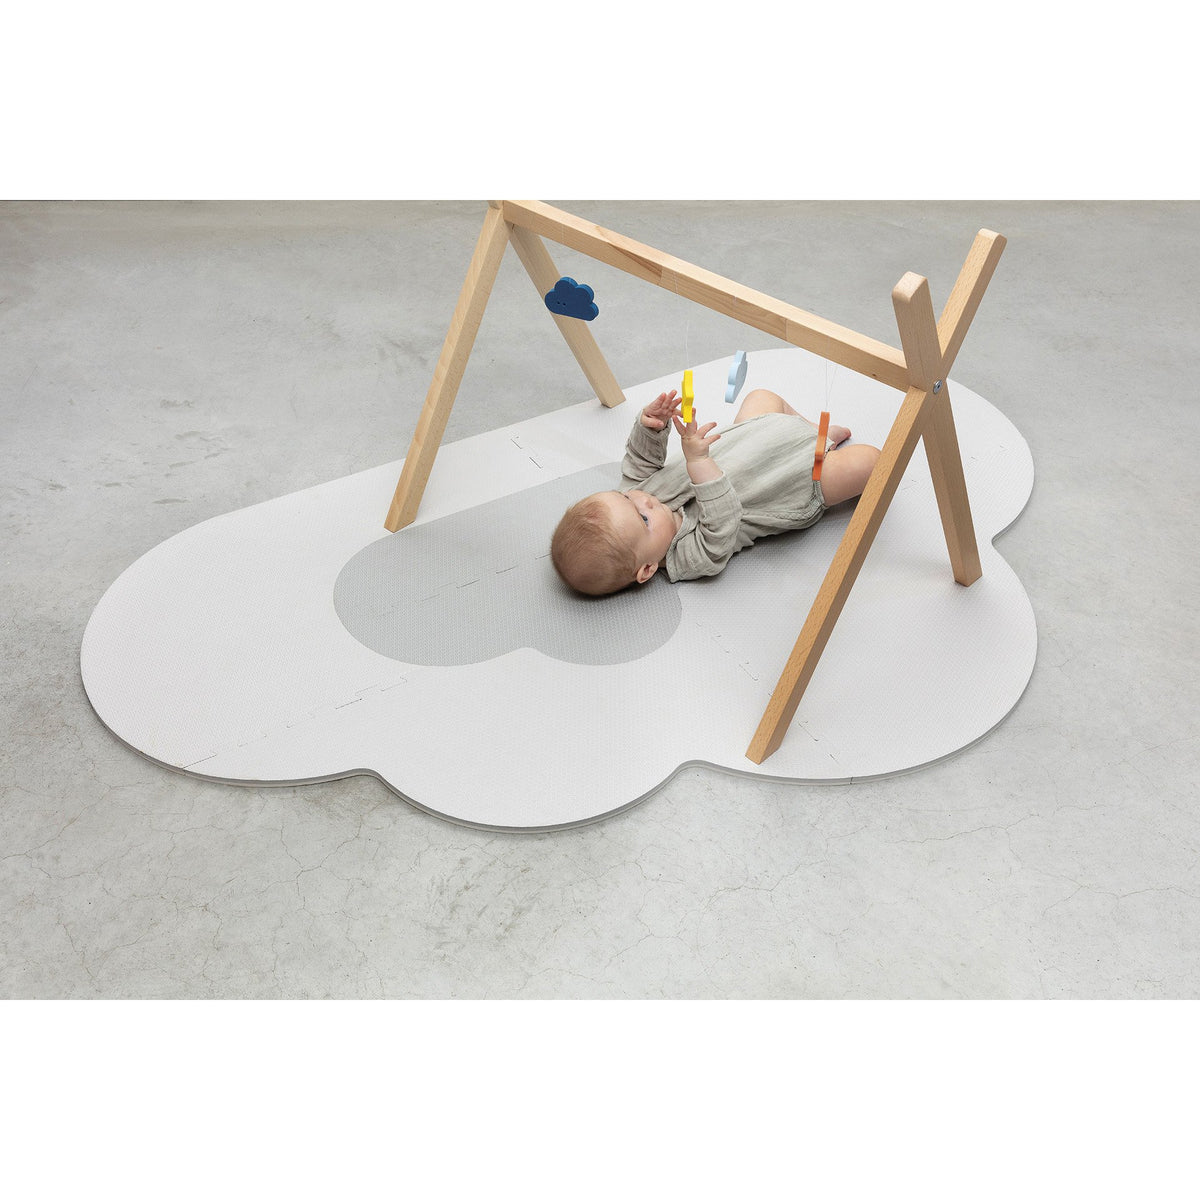 quut-playmat-head-in-the-clouds-s-145-x-90cm-pearl-grey- (6)